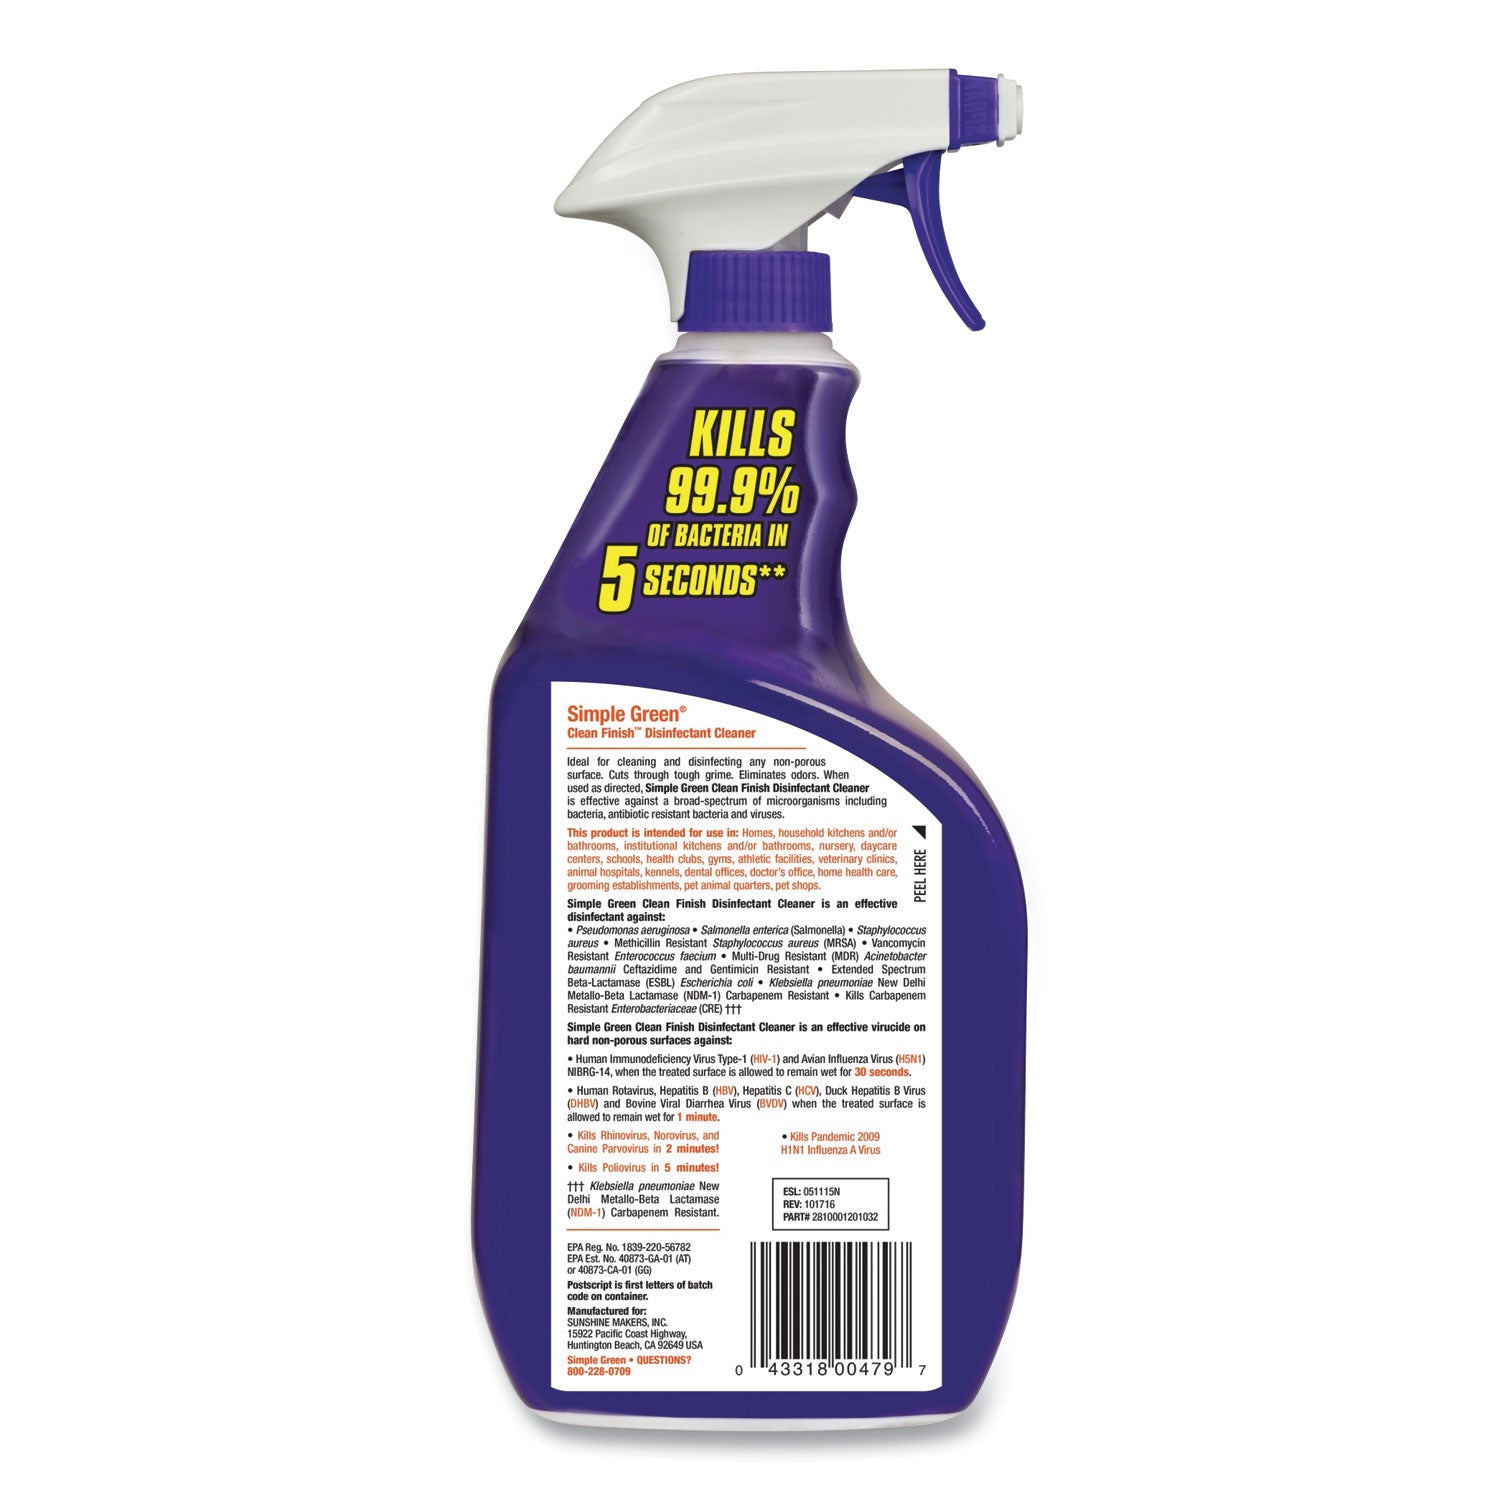 clean-finish-disinfectant-cleaner-herbal-32-oz-spray-bottle-12-carton_smp01032 - 2